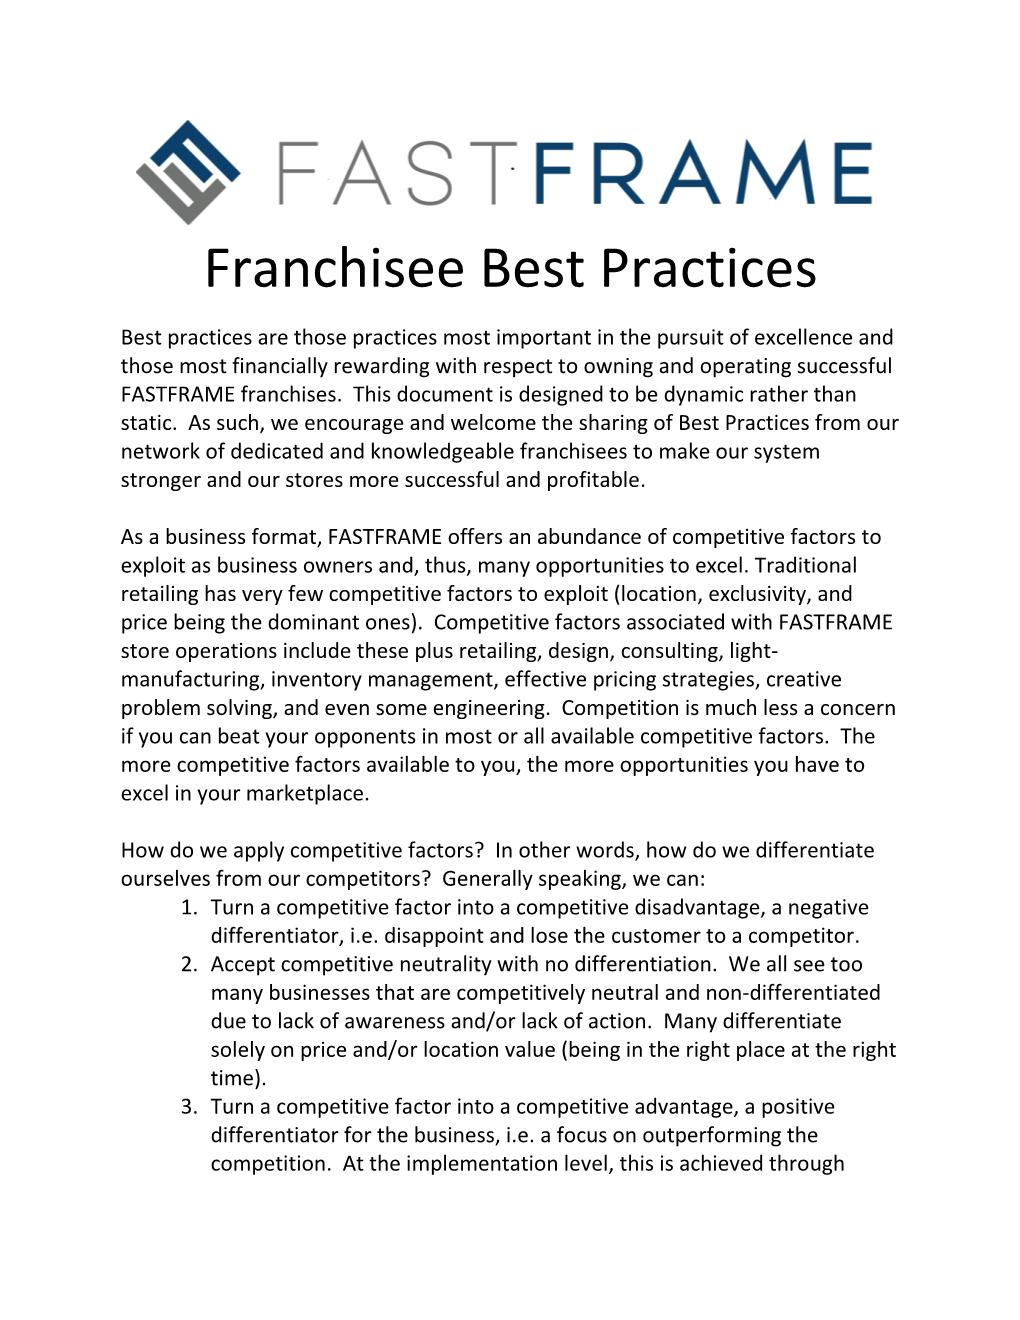 Franchisee Best Practices